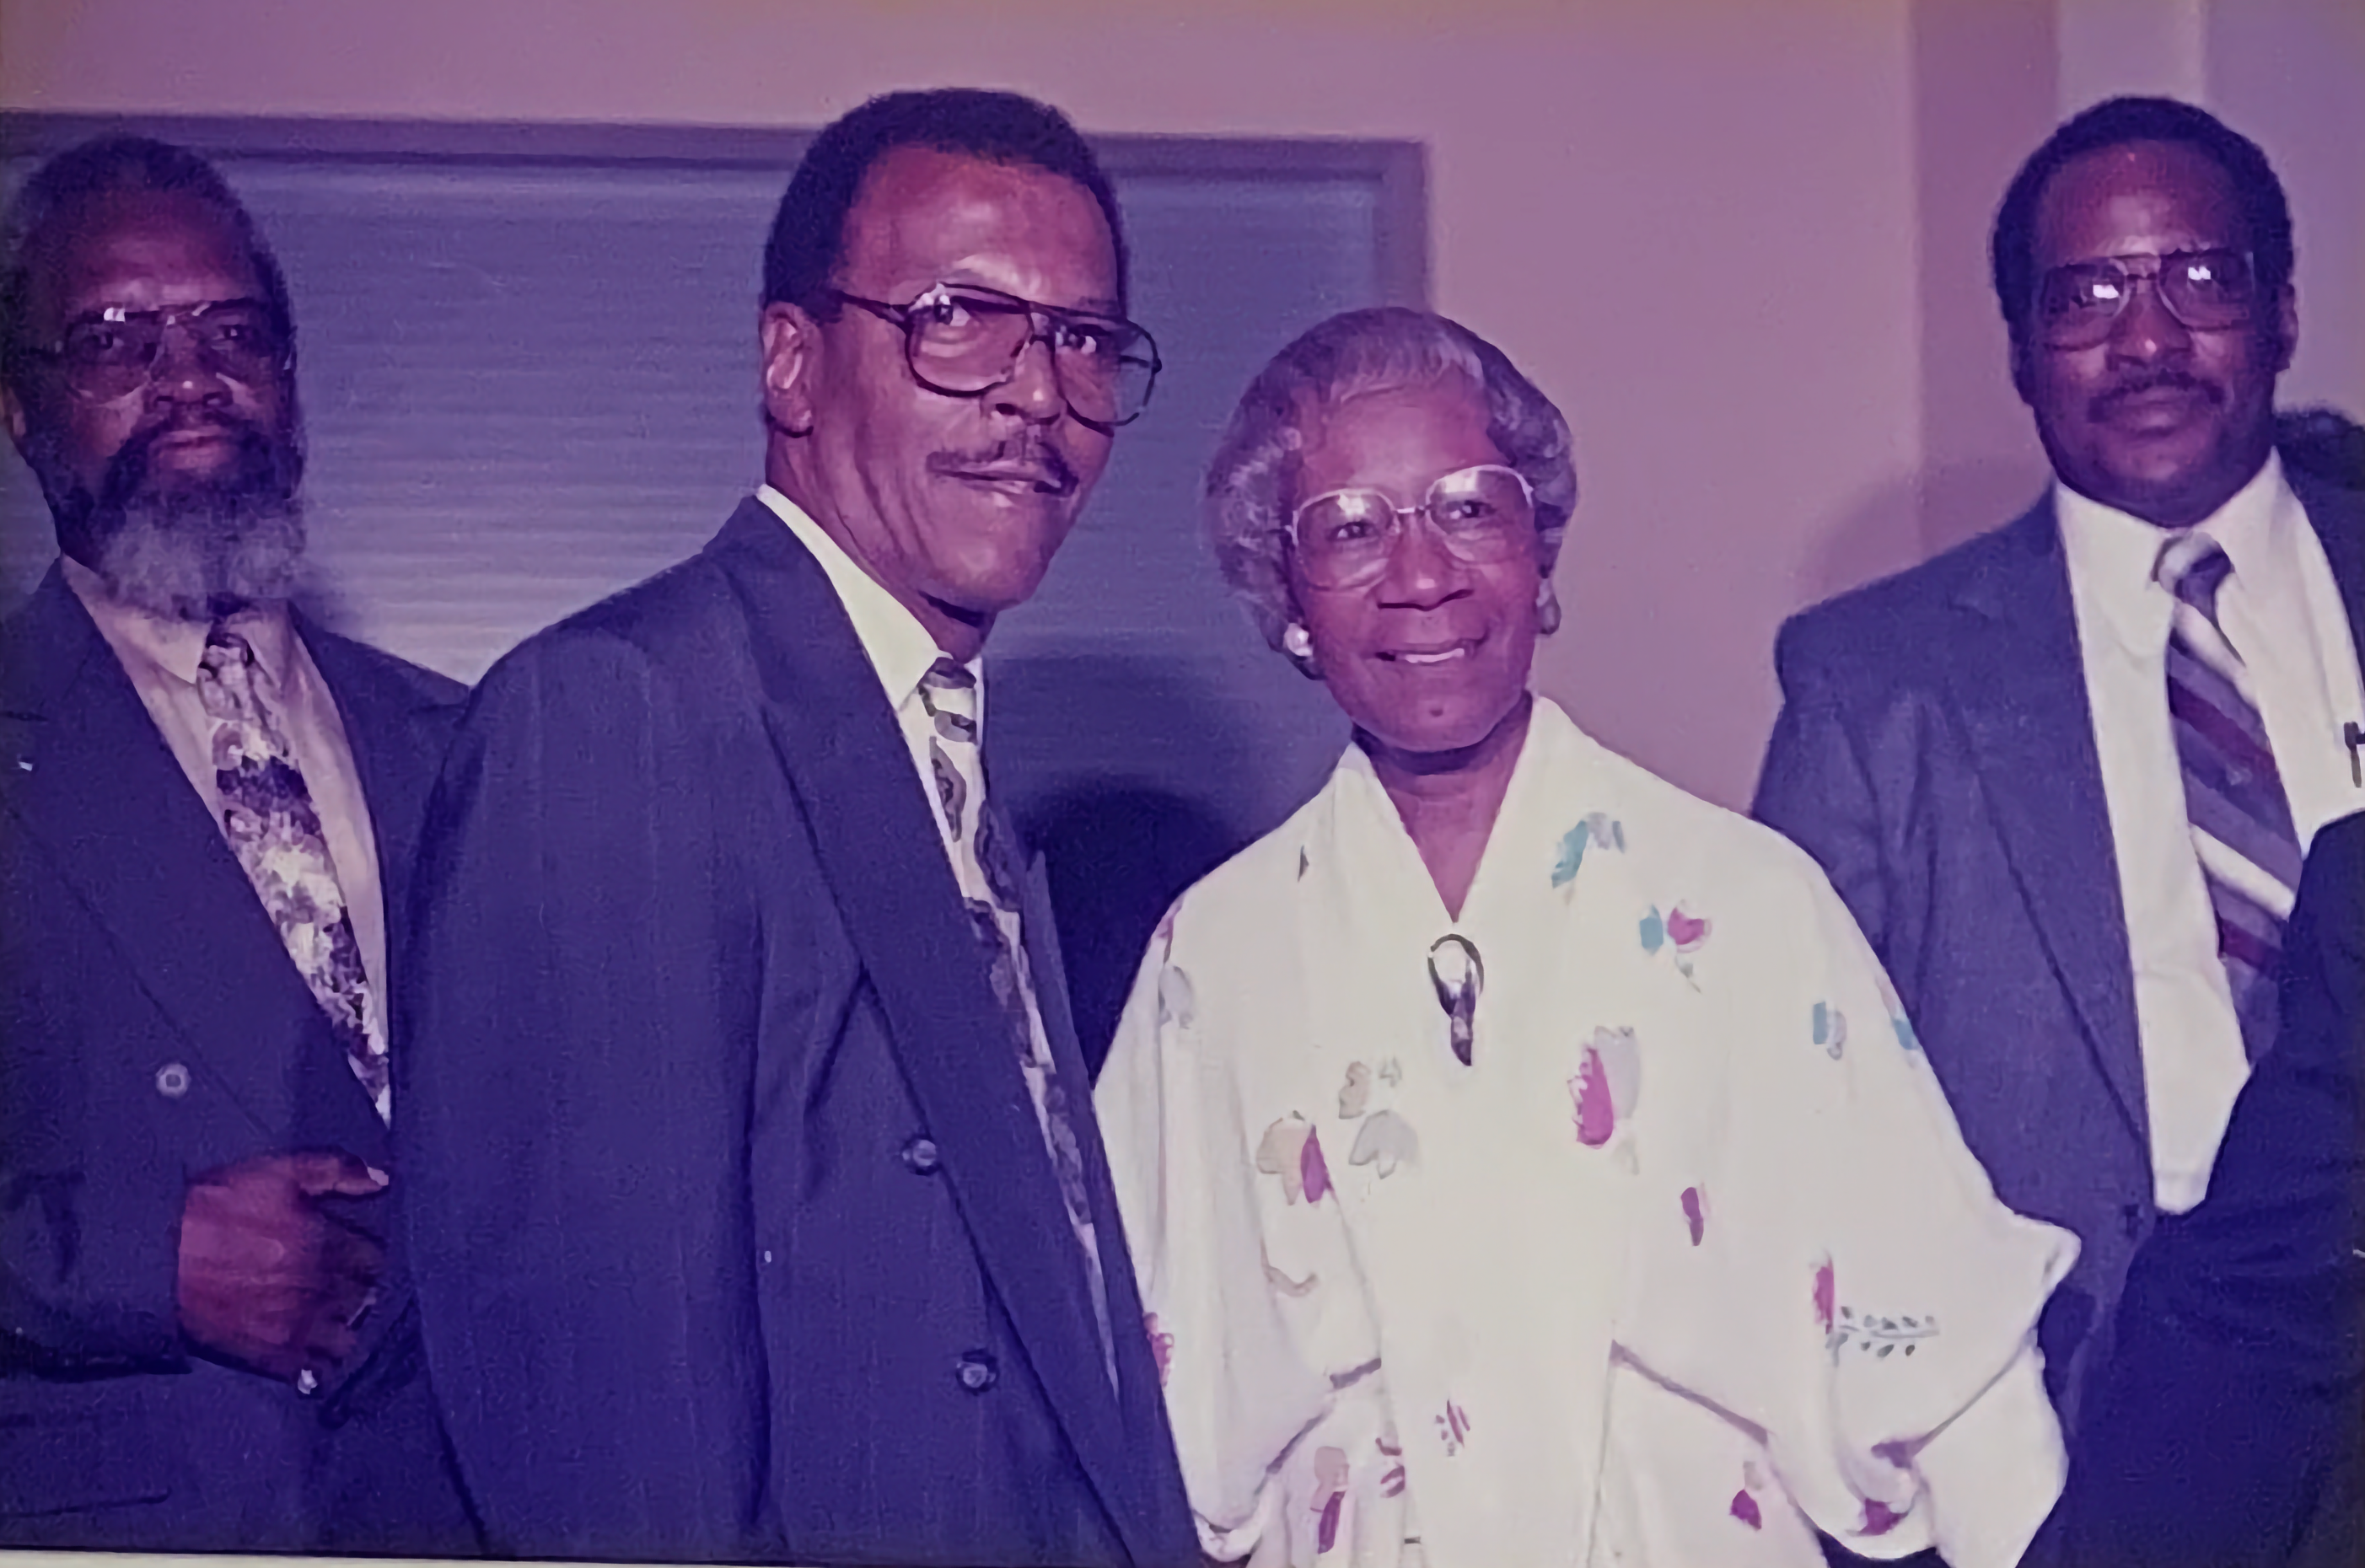 Shirley Chisolm posing with congregants from St. Paul AME Church in St. Augustine, Florida.